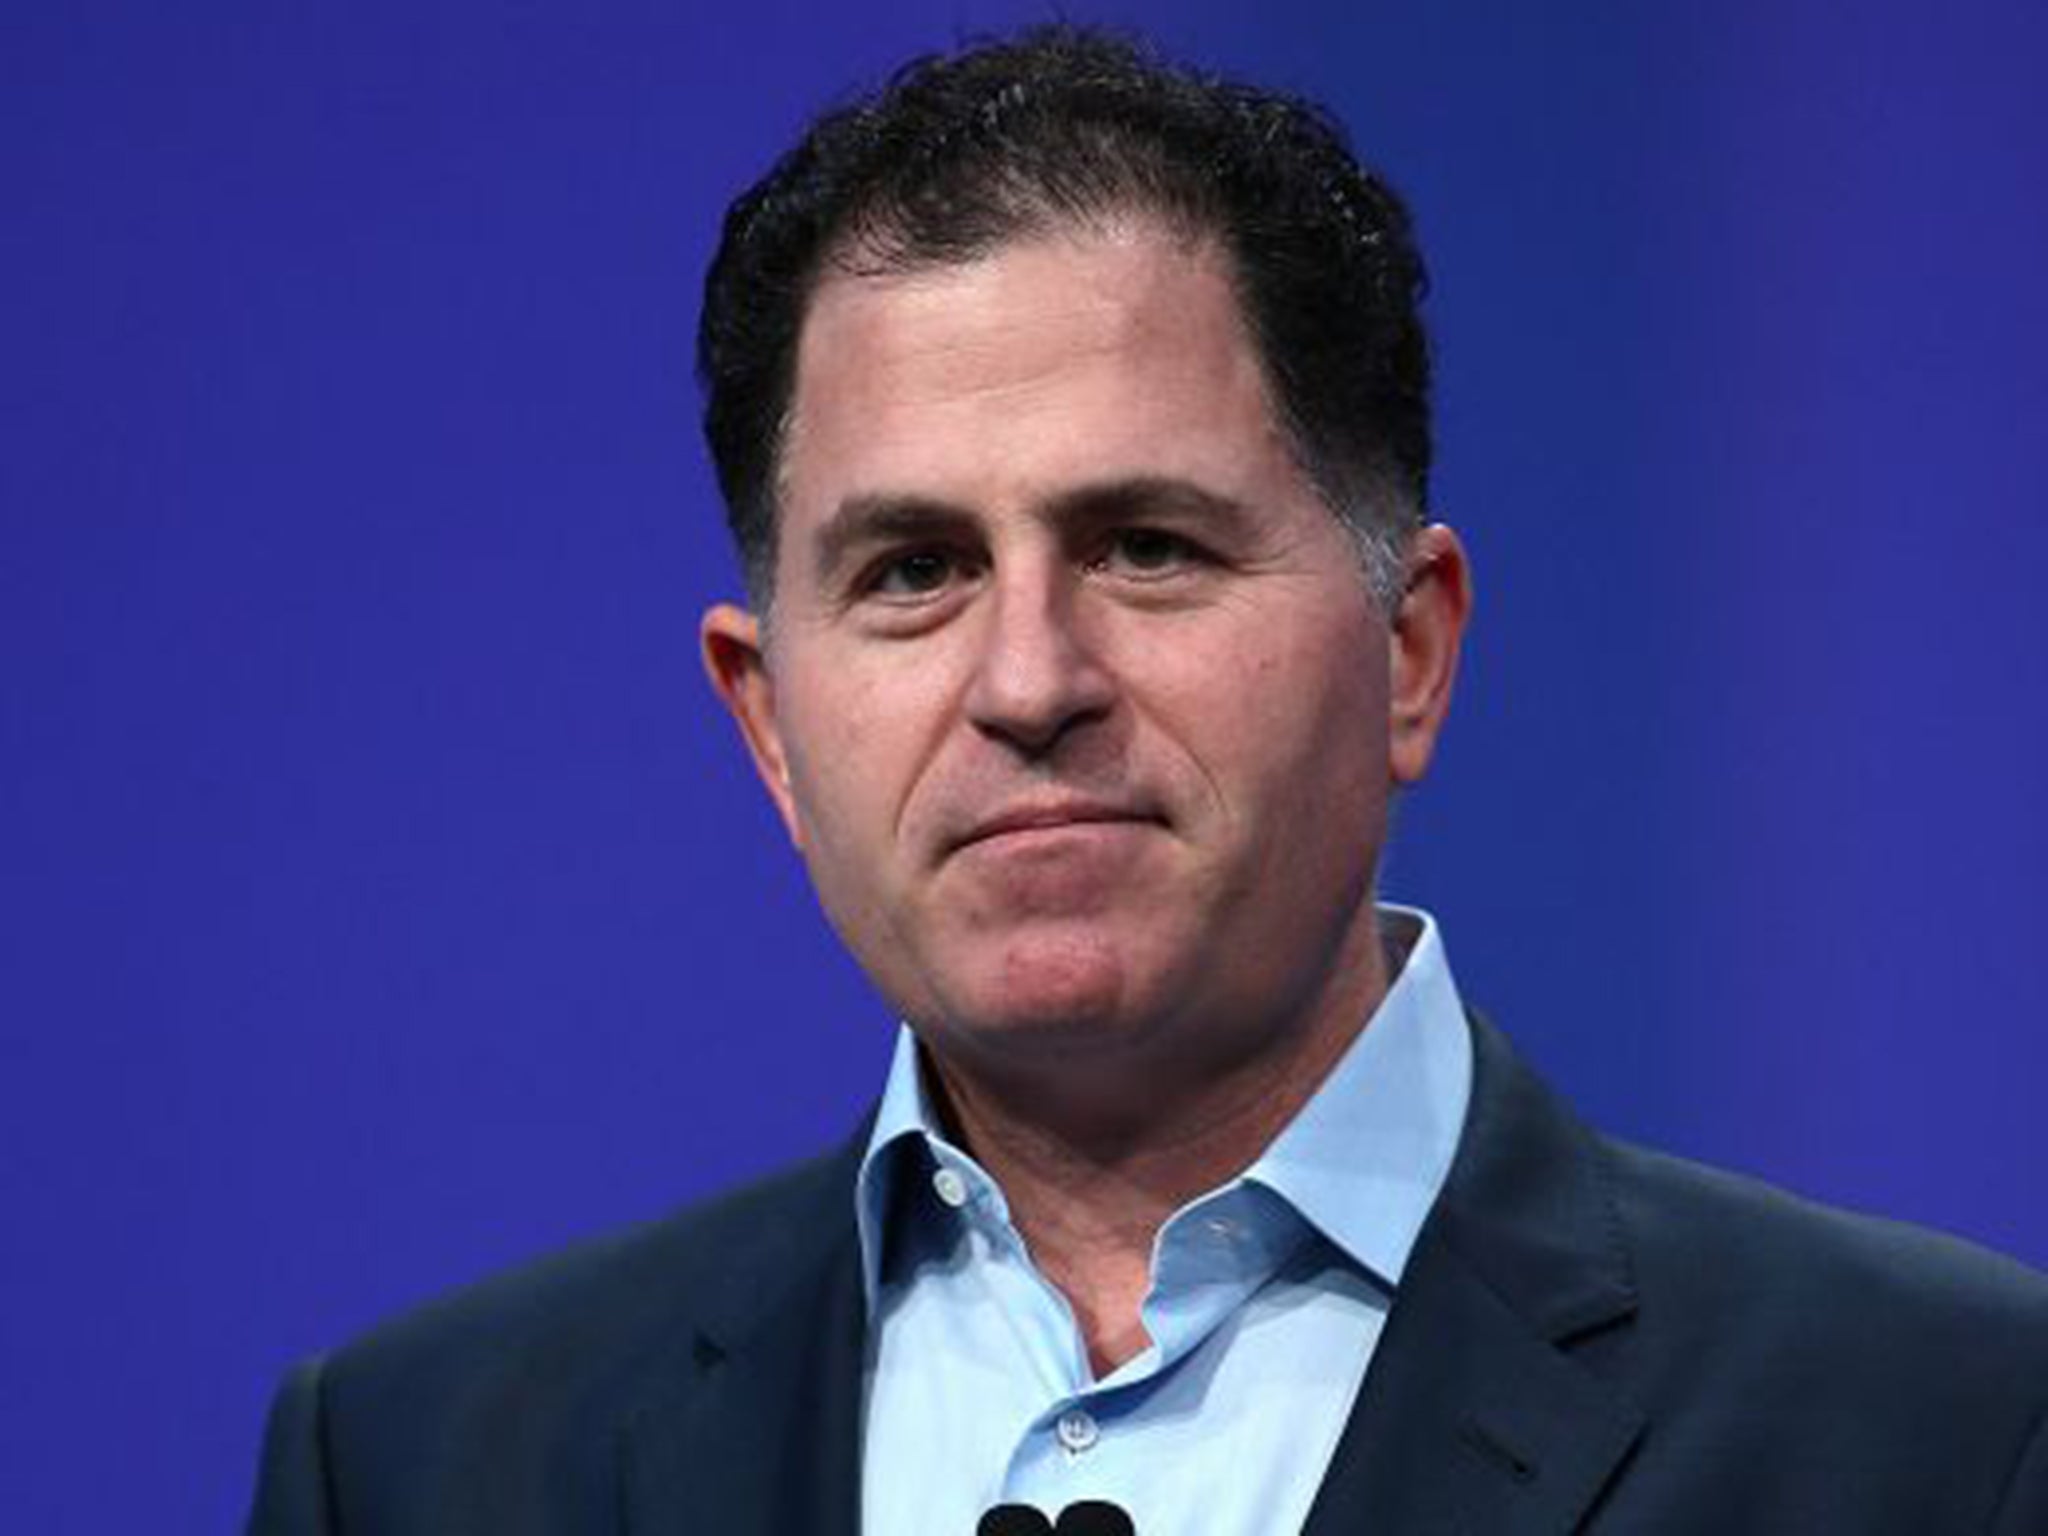 The takeover will give Michael Dell access to EMC’s data centres